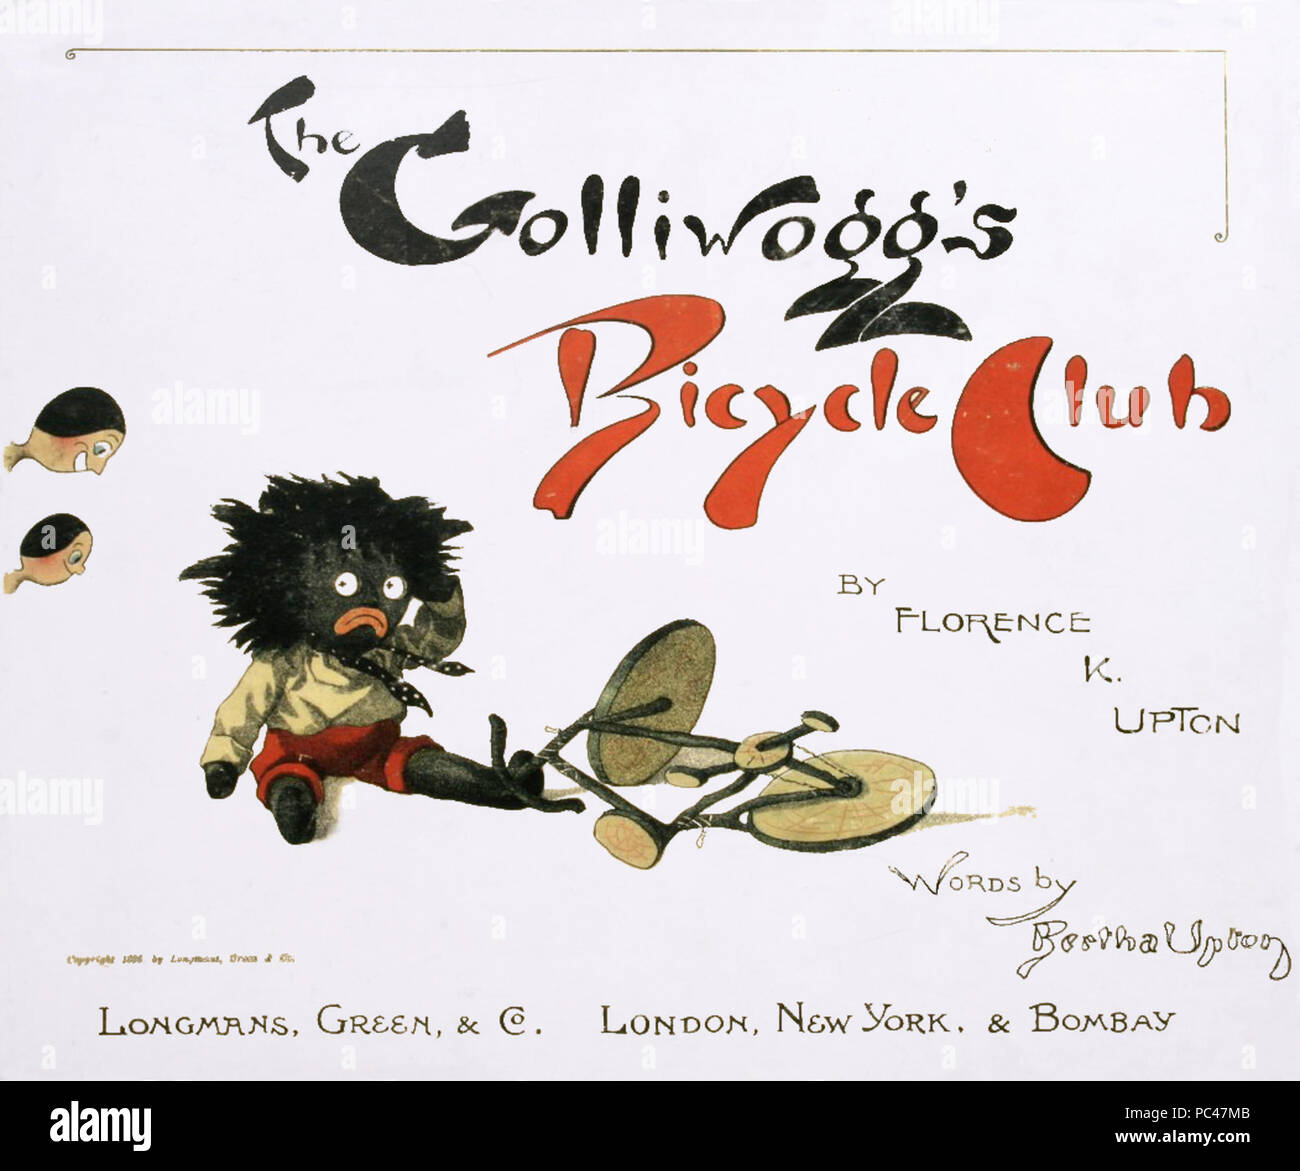 596 The Golliwogg's Bicycle Club cover Stock Photo